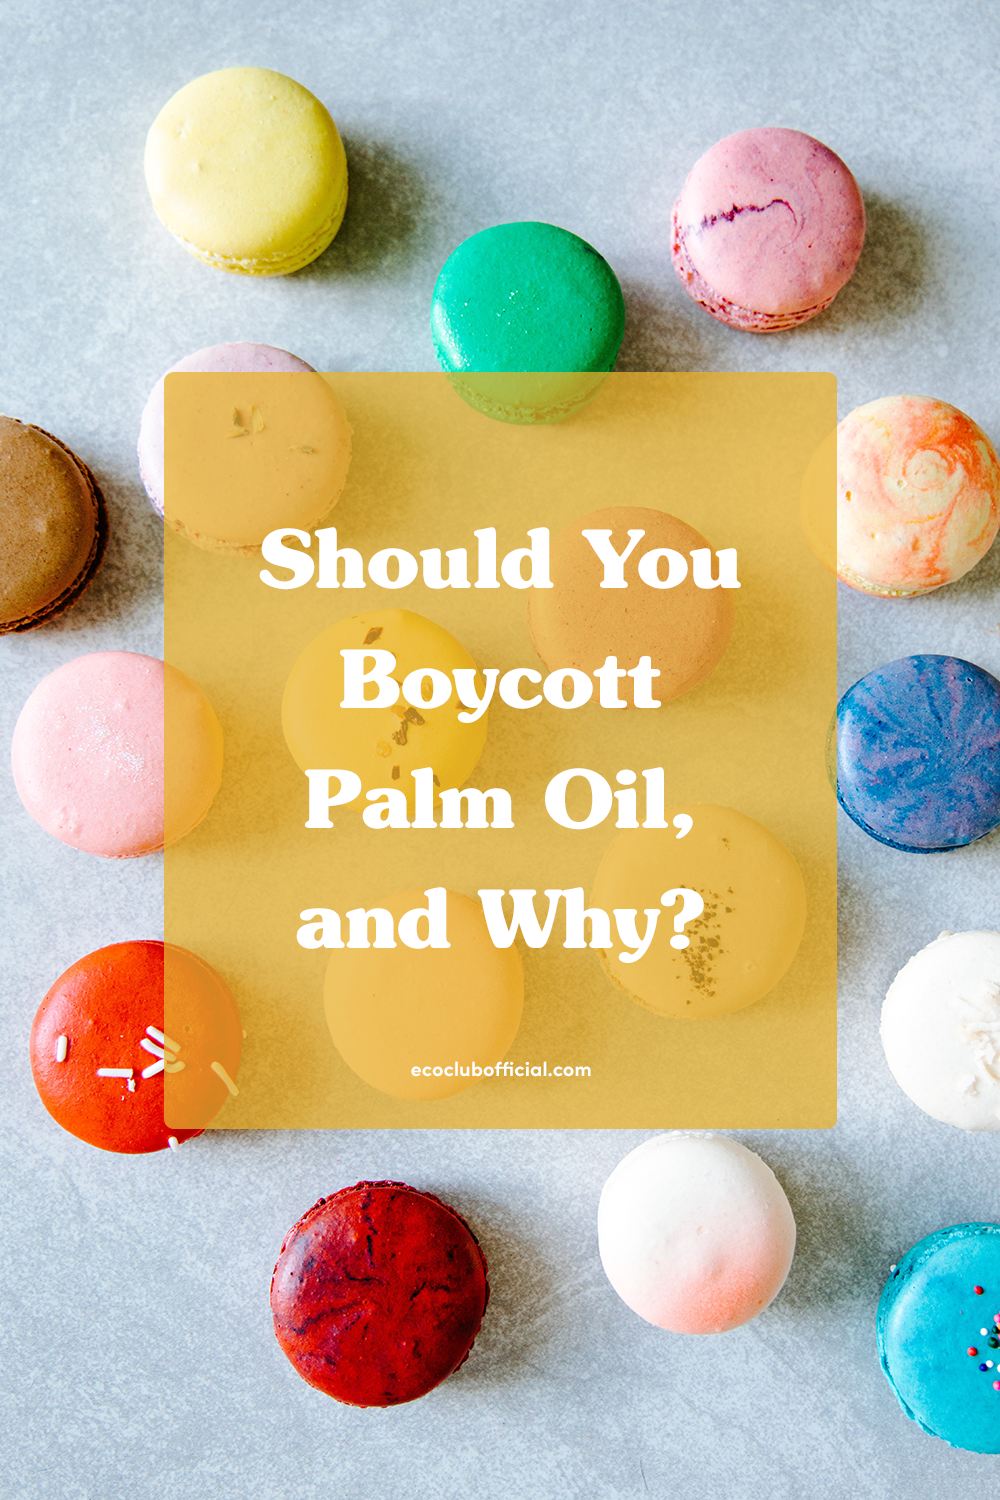 Is Palm Oil Bad For You?